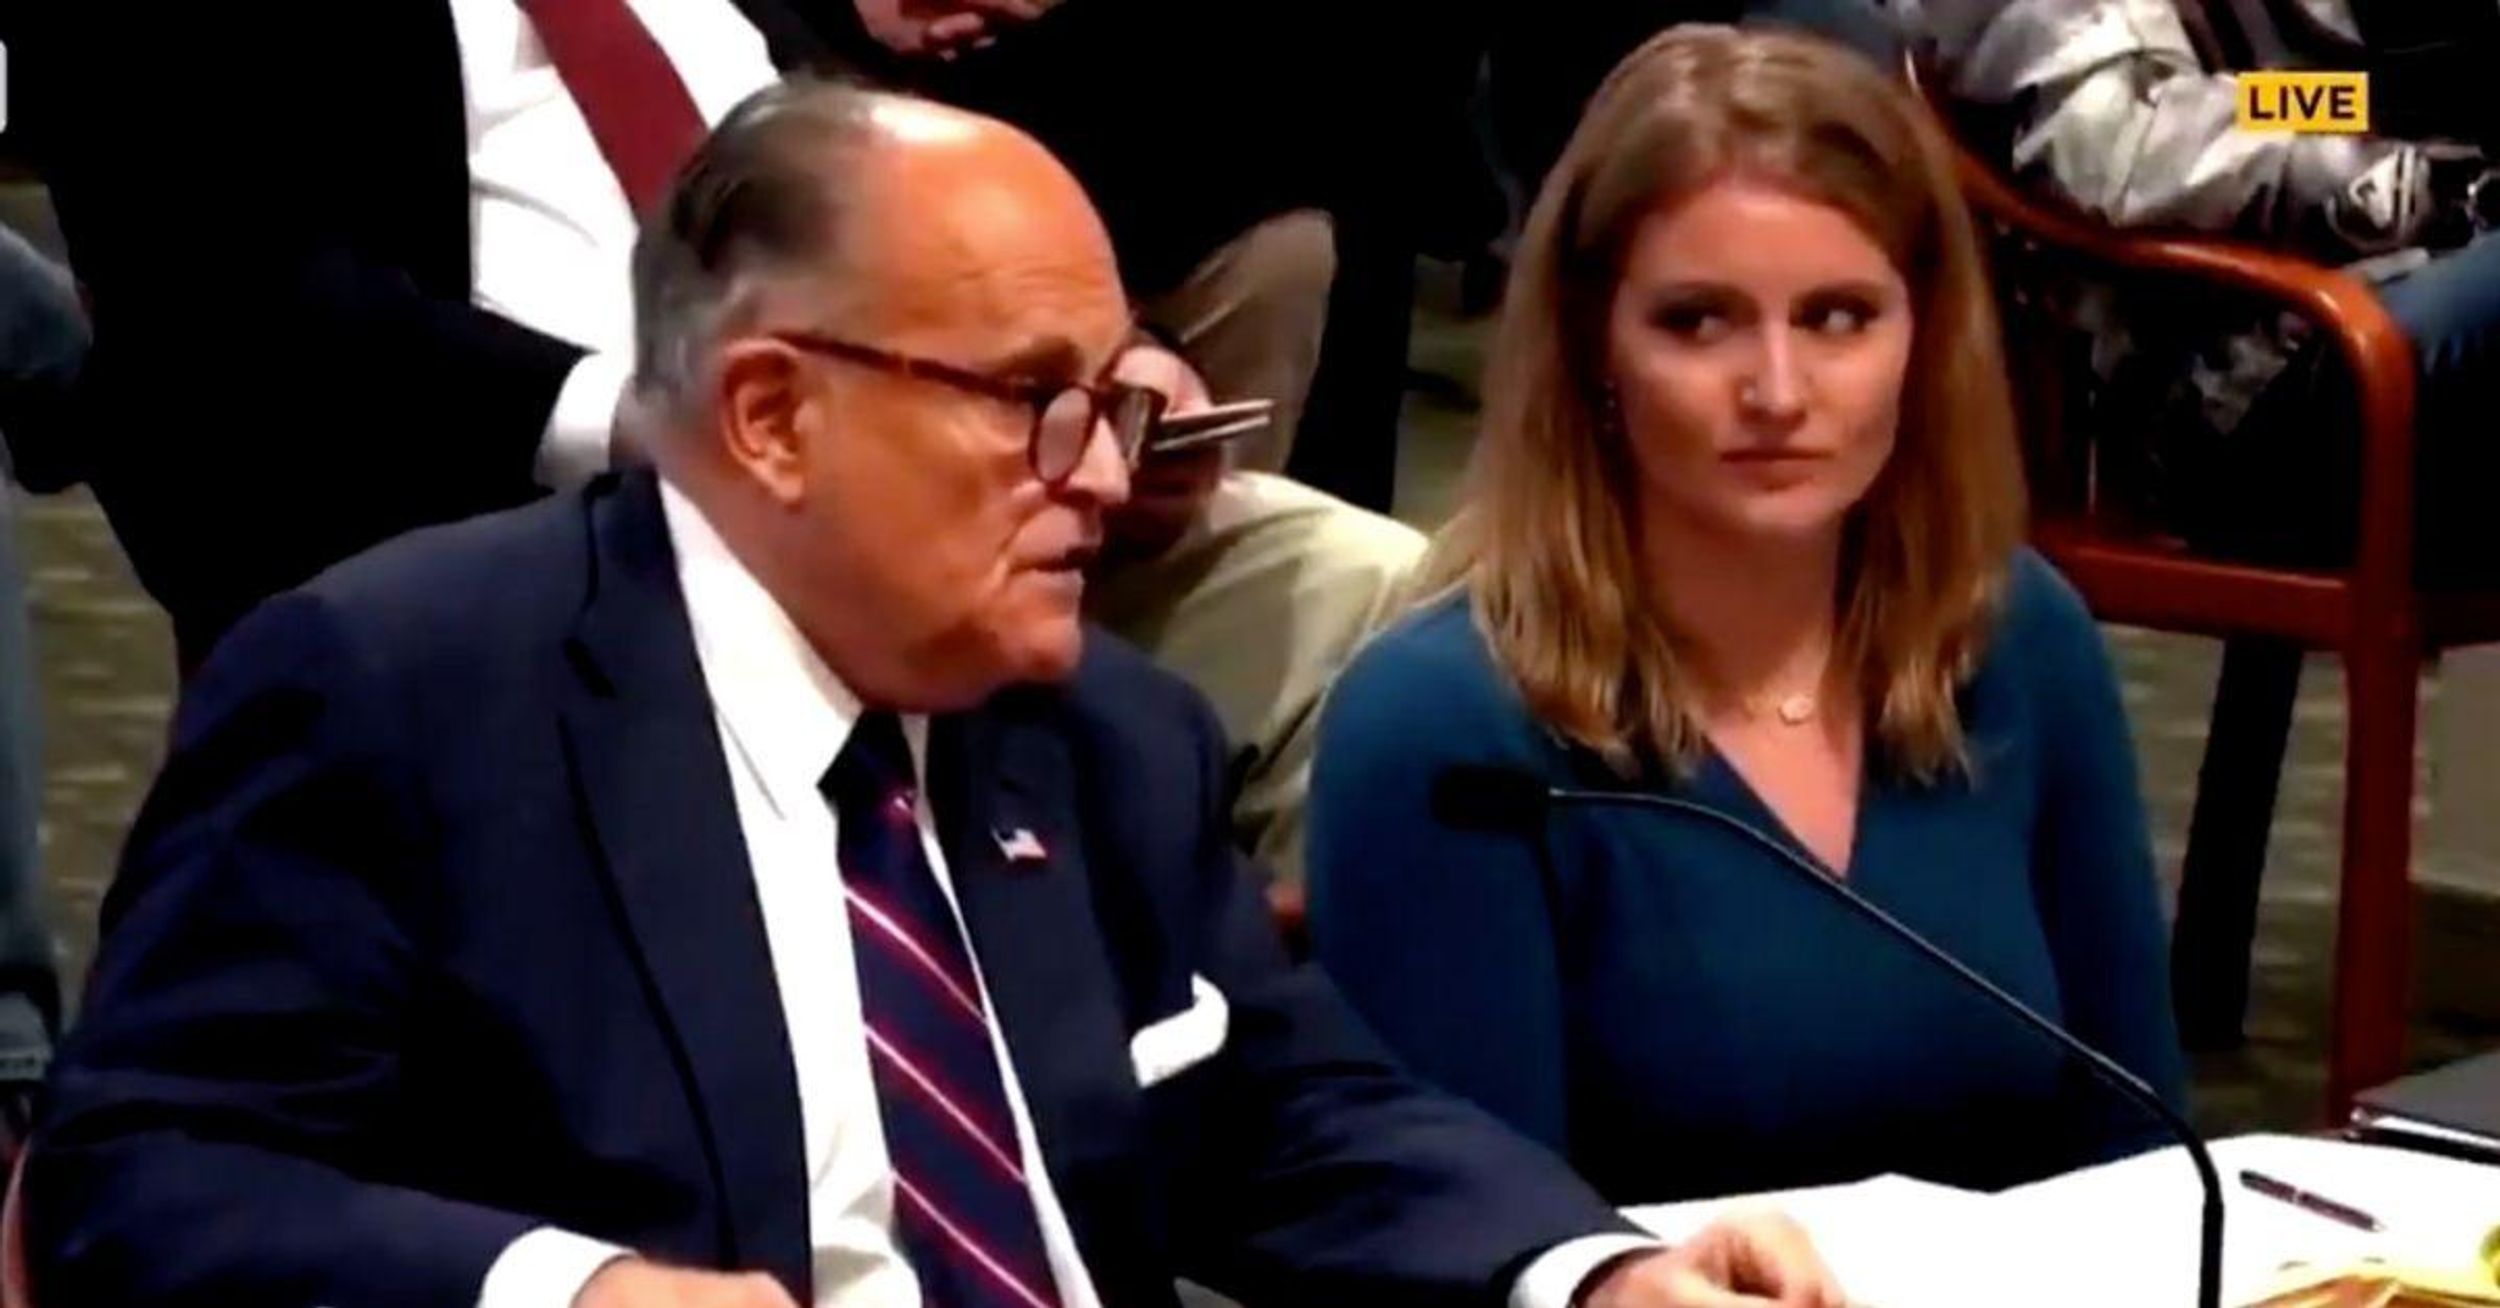 Rudy Apparently Farted So Loudly His Mic Picked It Up—And His Fellow Lawyer's Reaction Is All Of Us